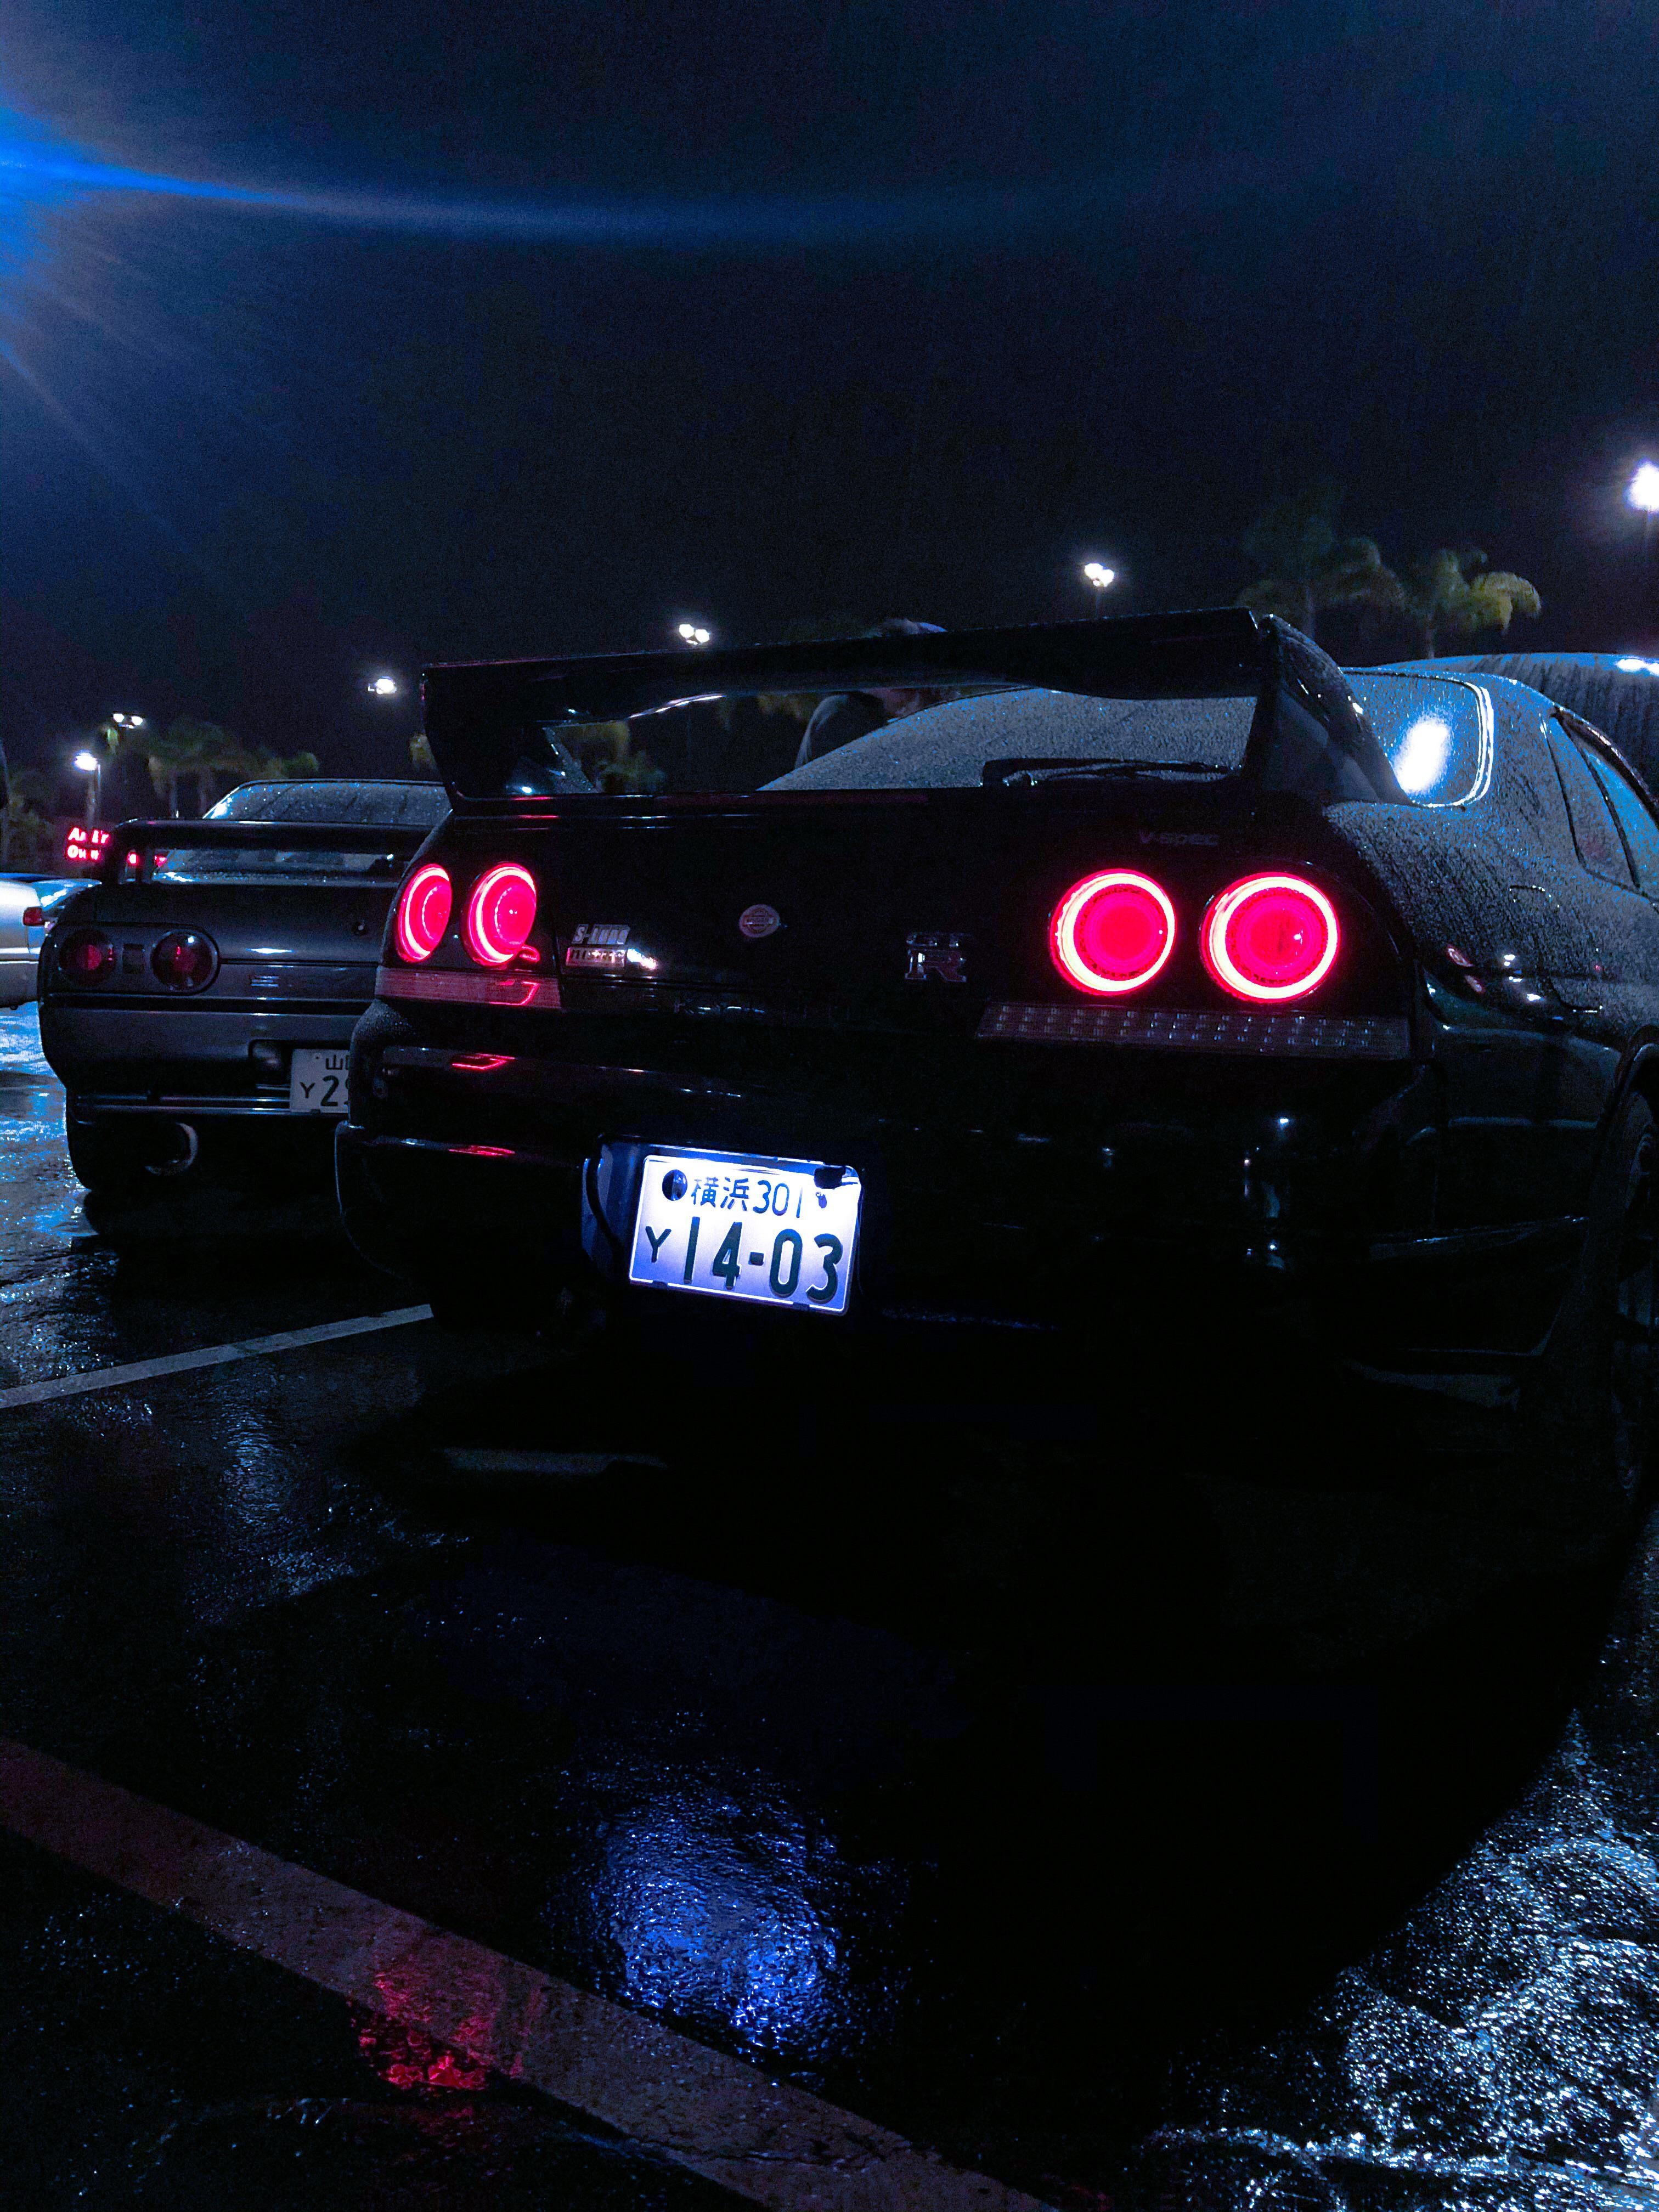 R33 Nismo GTR and R32 GTR in the rain. Makes for some good phone wallpaper.: JDM